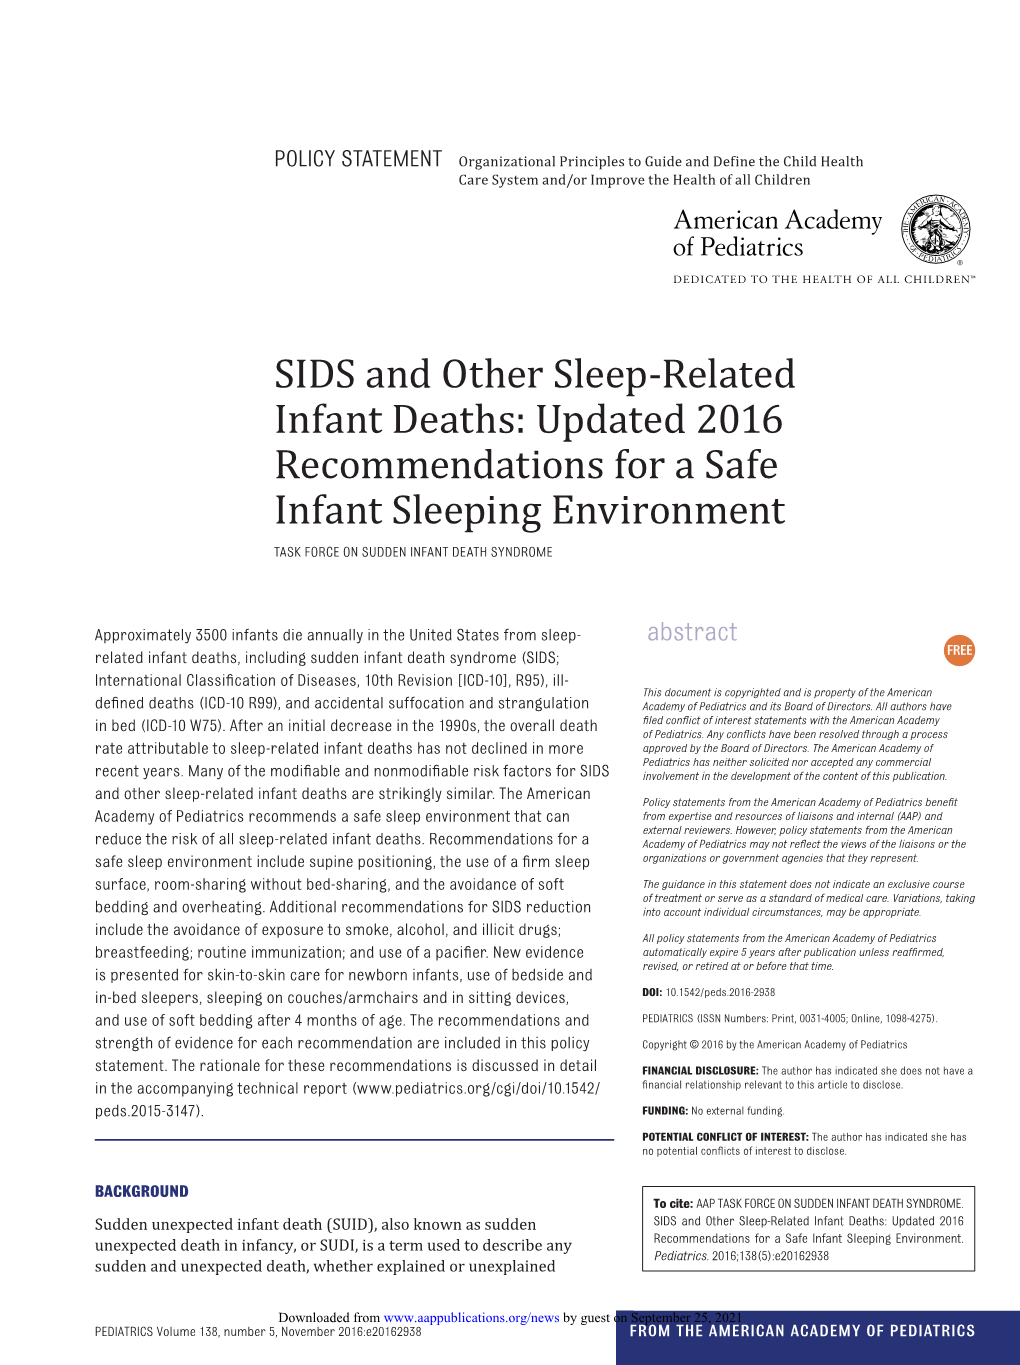 SIDS and Other Sleep-Related Infant Deaths: Updated 2016 Recommendations for a Safe Infant Sleeping Environment TASK FORCE on SUDDEN INFANT DEATH SYNDROME